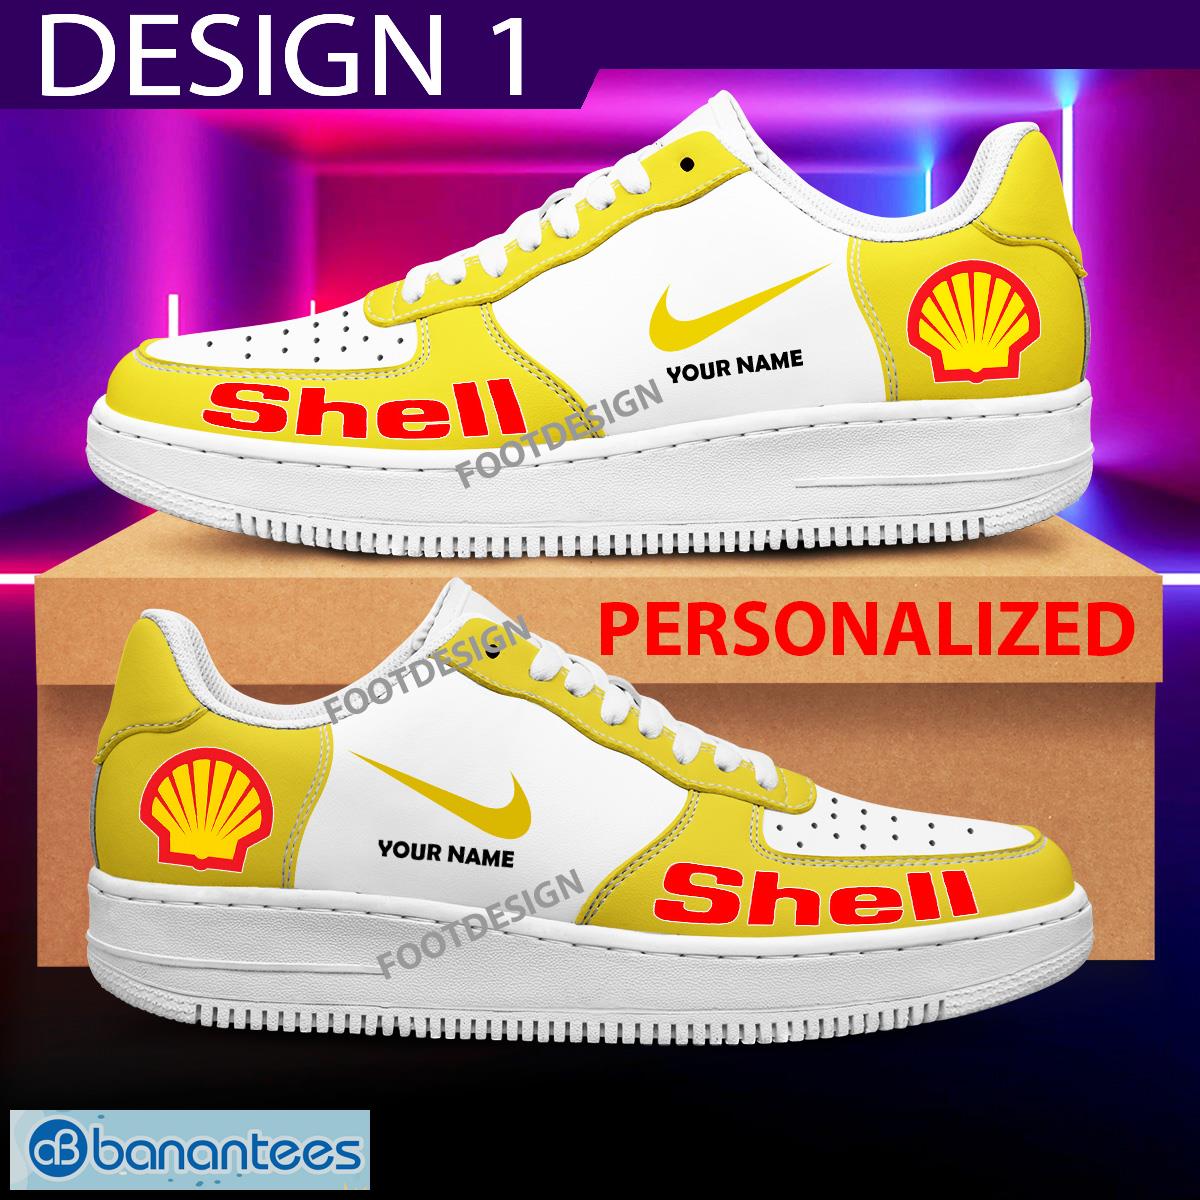 Custom Name Shell Brand Air Force 1 Sneakers New Pattern For Fans Gift AF1 Shoes - Brands Shell Air Force 1 Sneakers Custom Name Photo 1